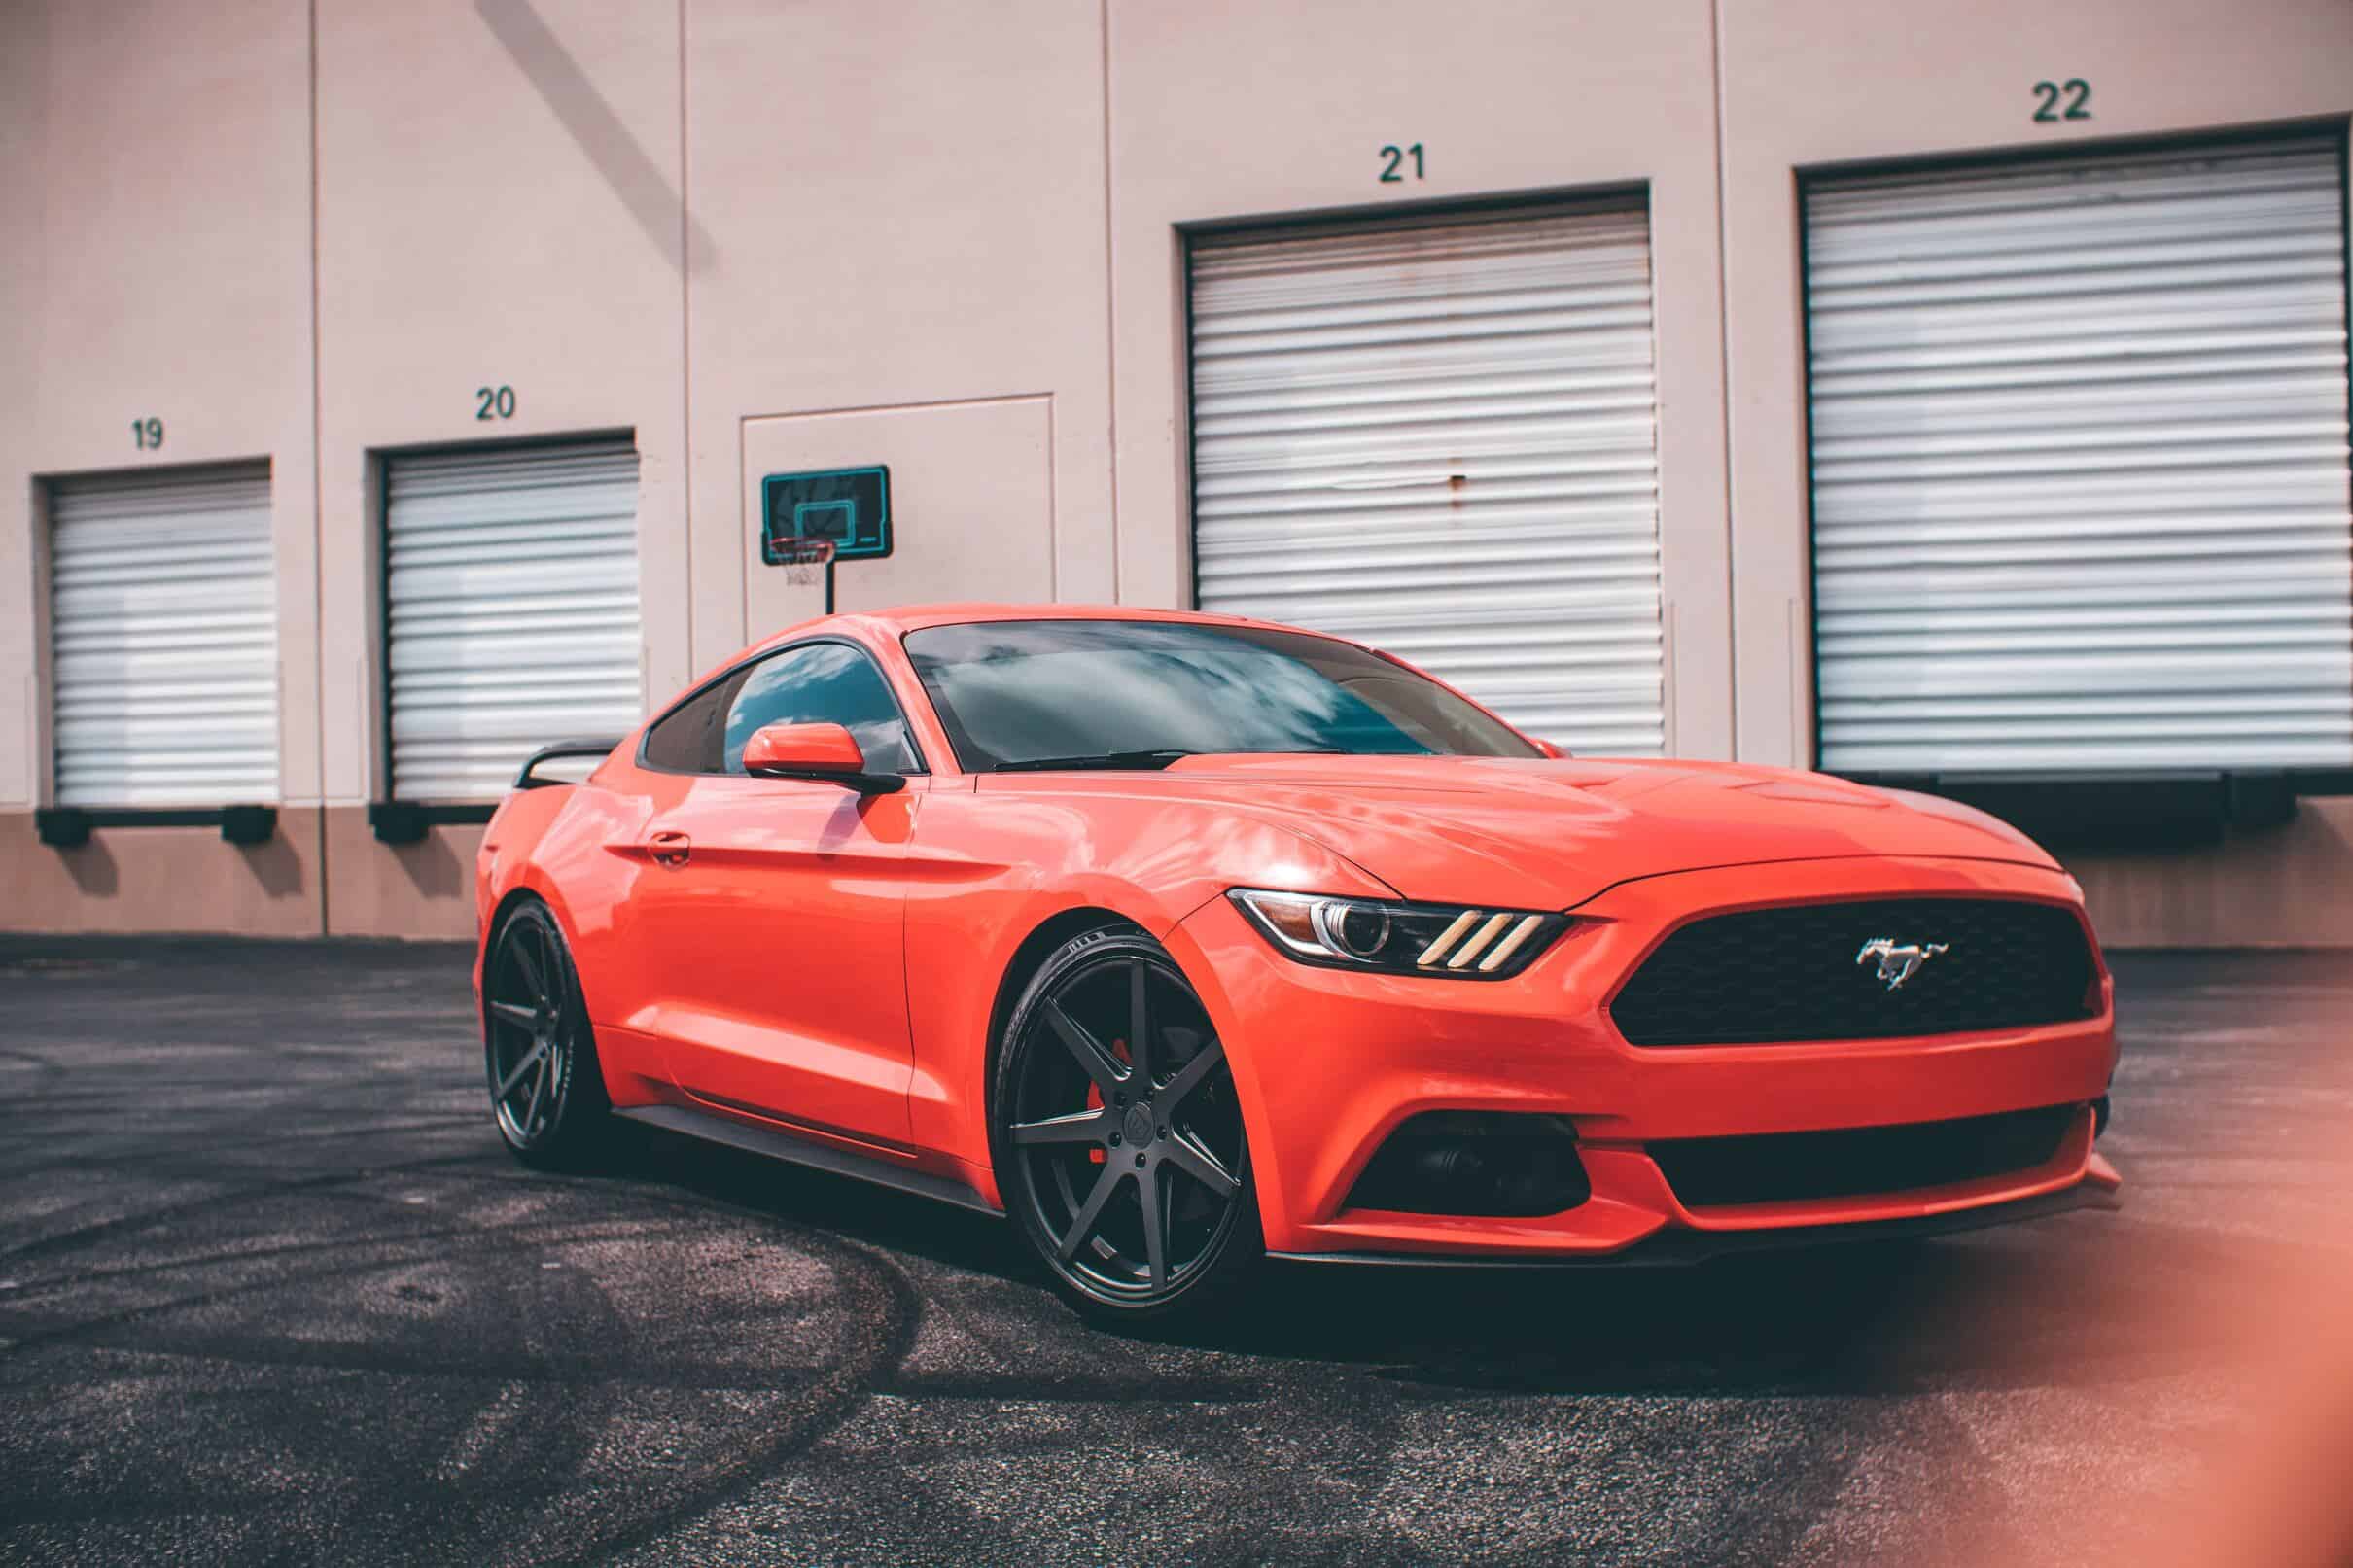 Ford Mustang - A classic American sports car